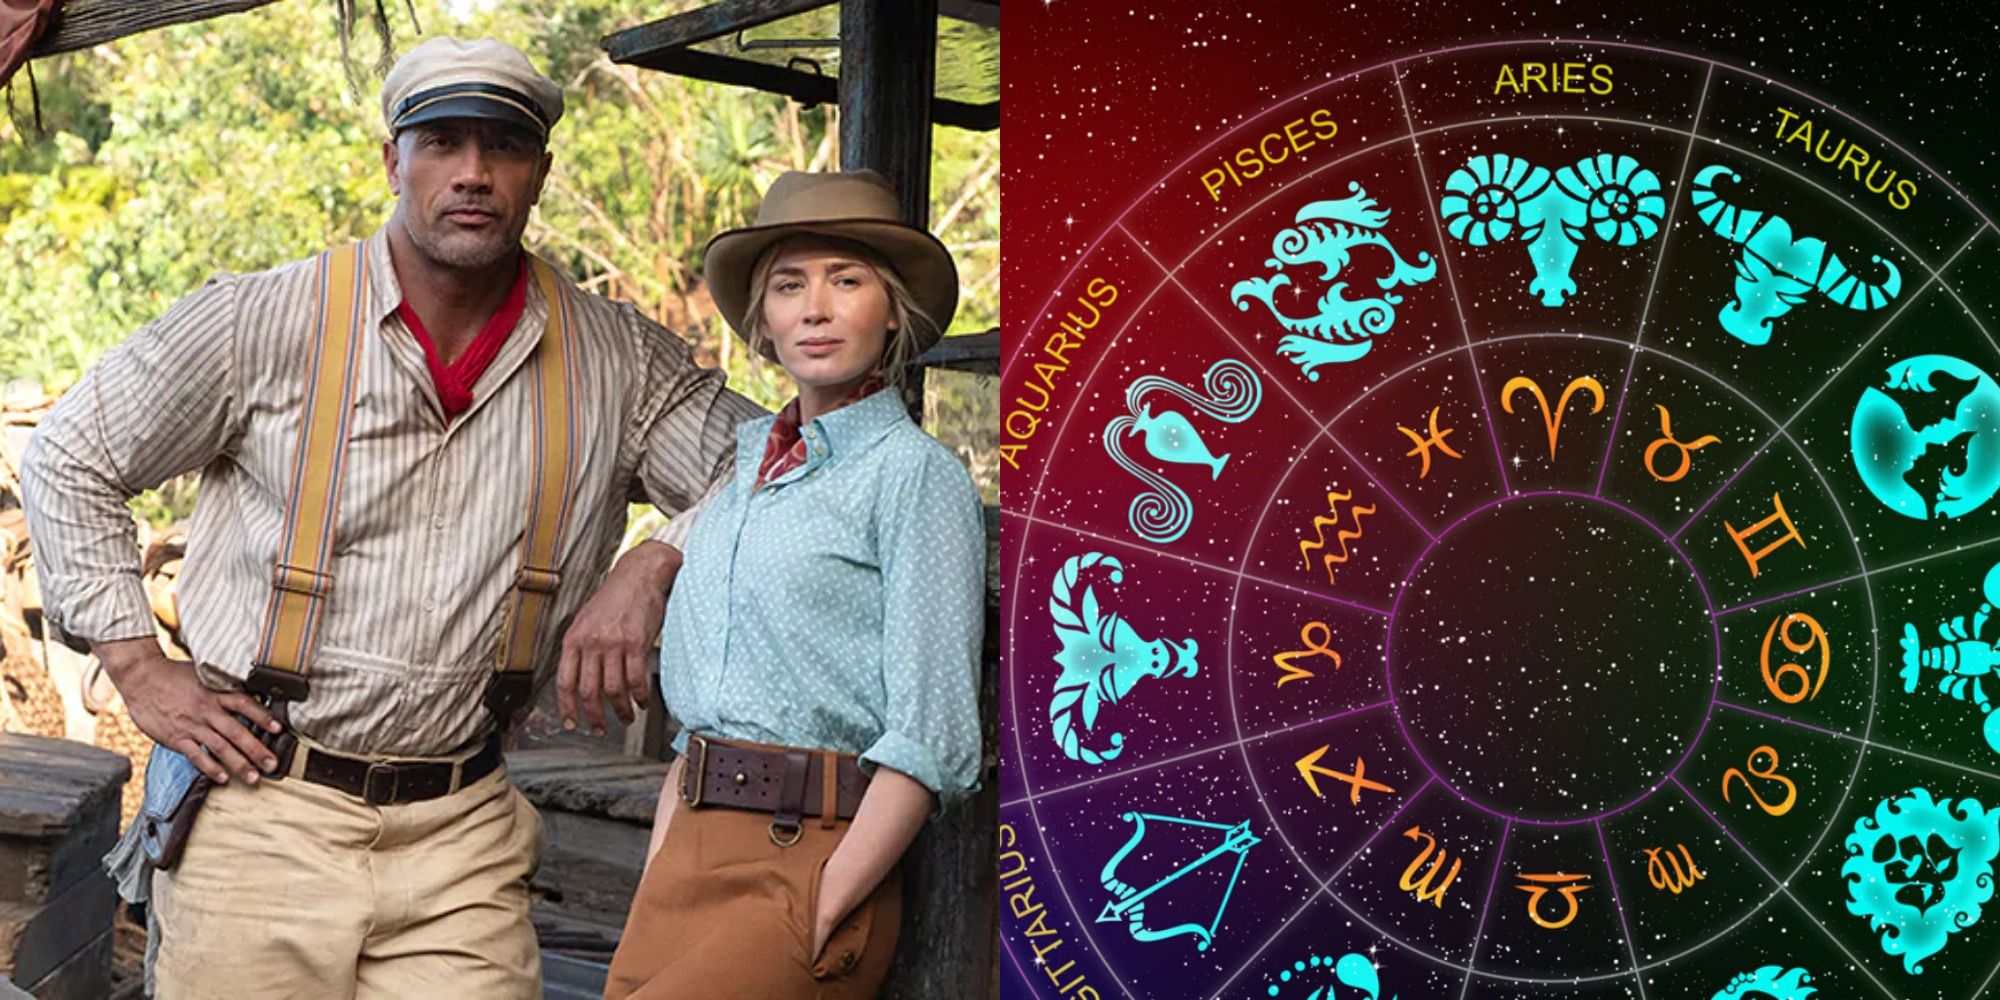 Jungle Cruise Which Character Are You, Based On Your Zodiac Sign?